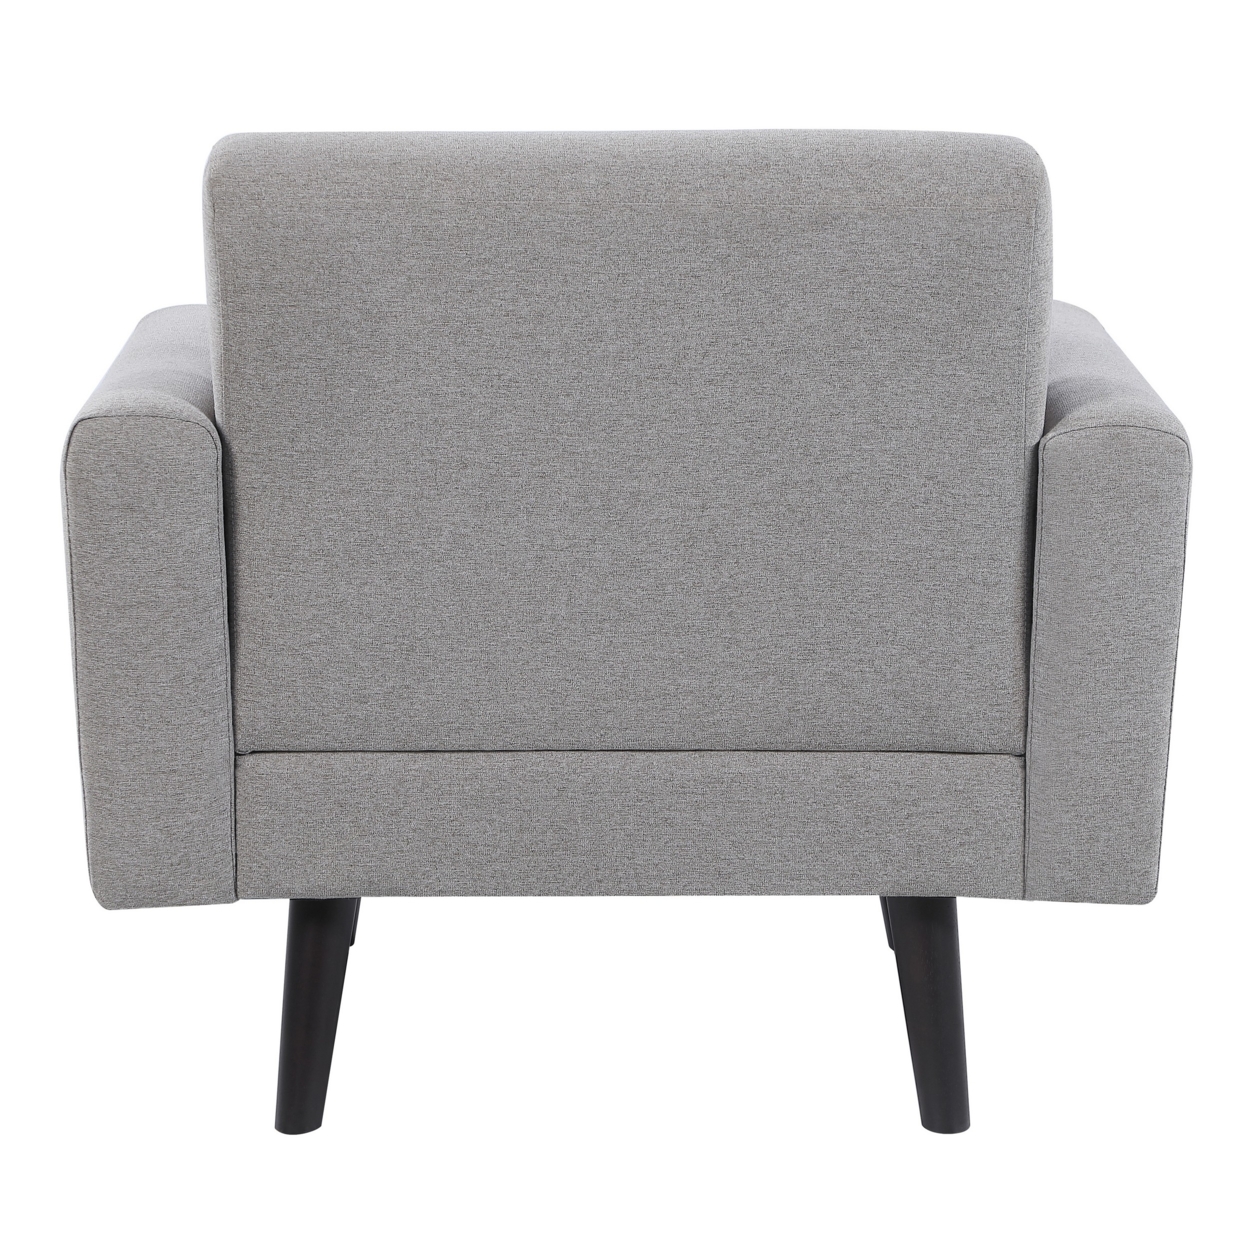 36 Inch Modern Accent Chair, Lumbar Pillow, T Backrest, Rolled Arms, Gray